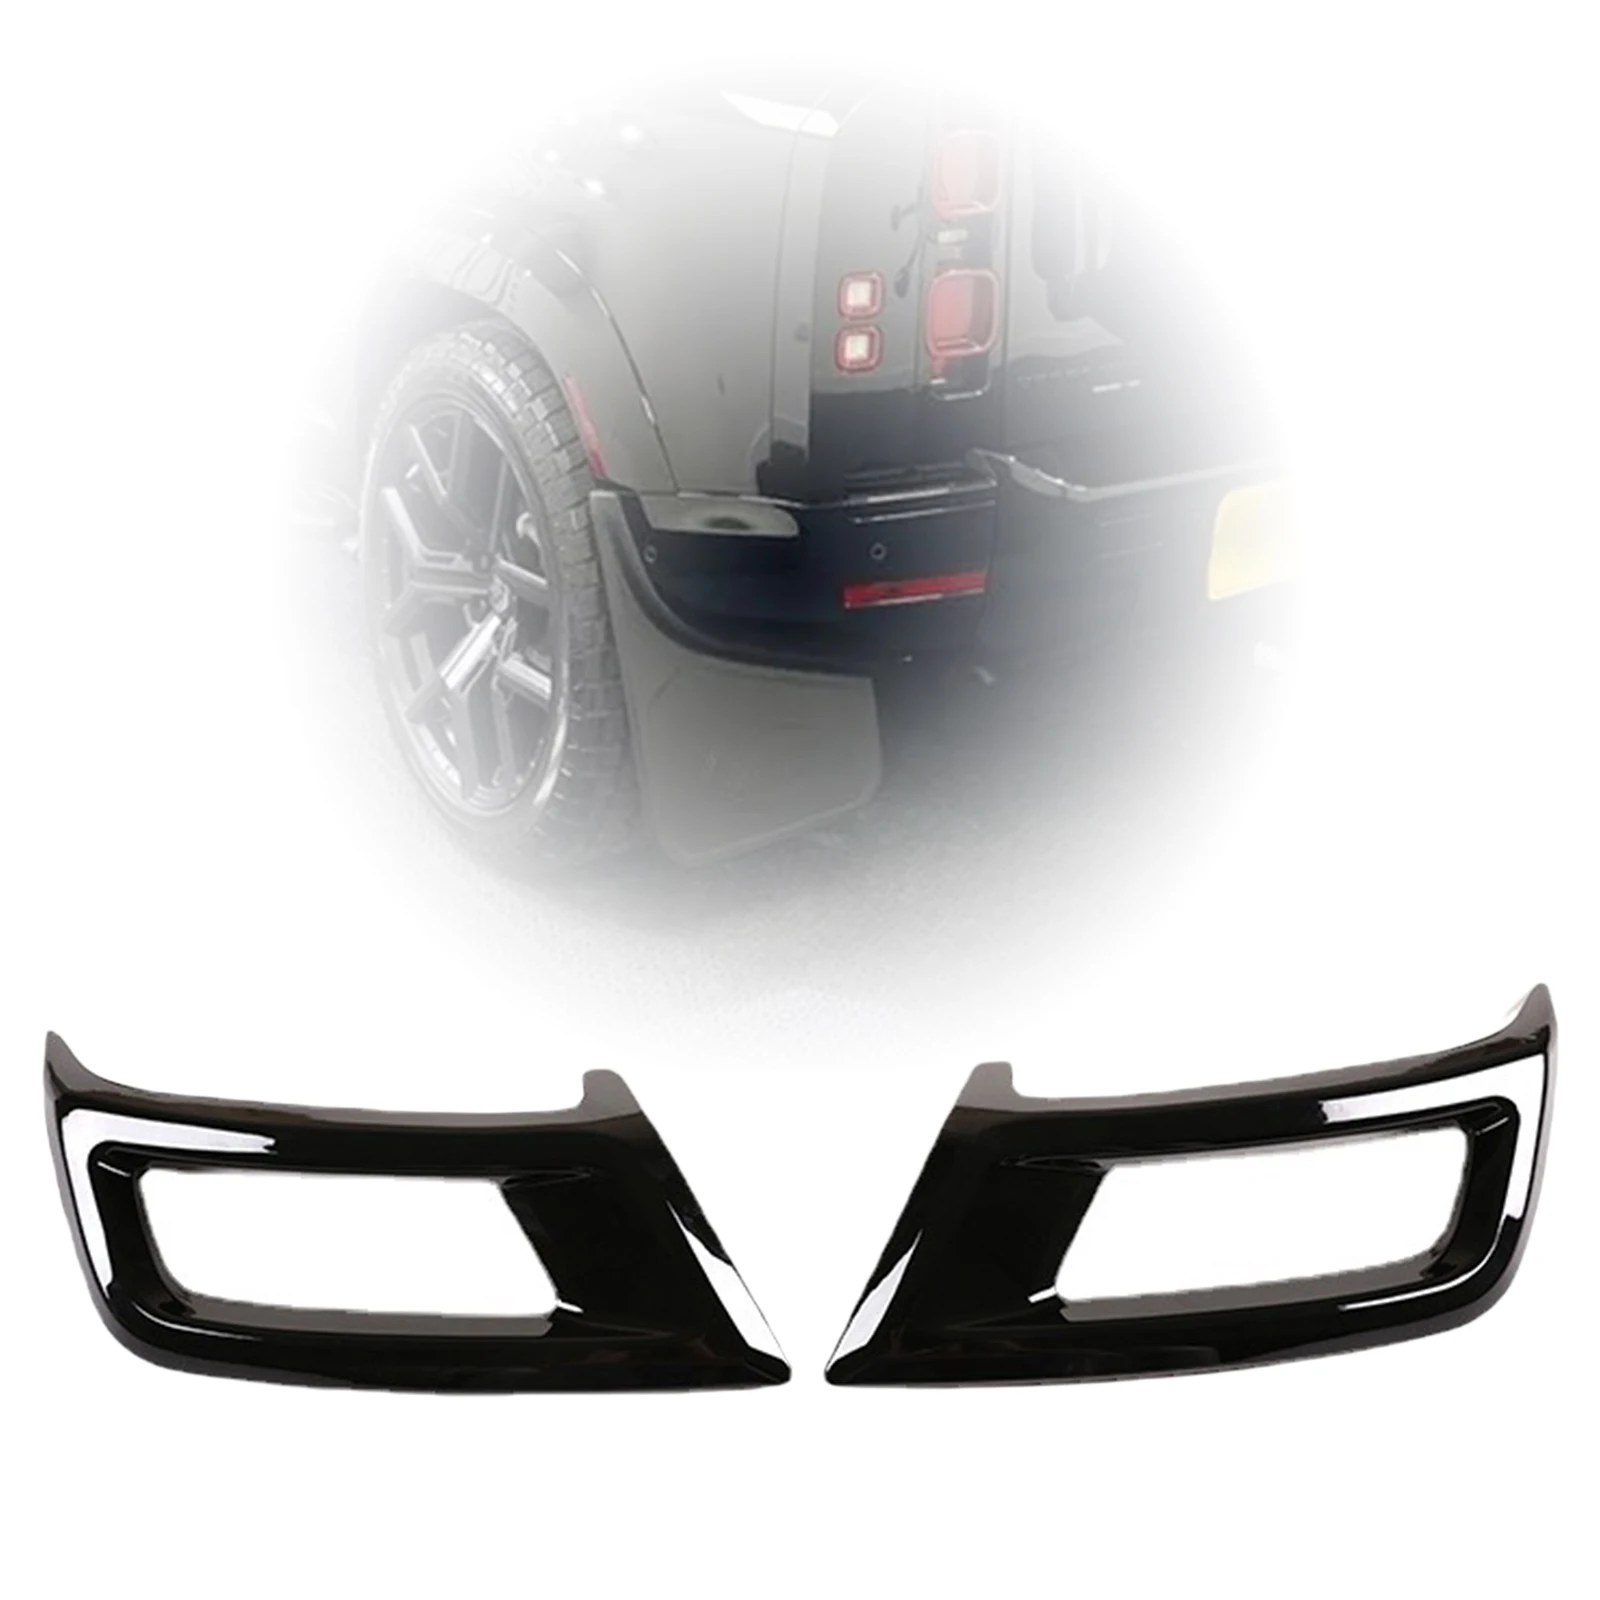 2 PCS Tail Throat Frame Car Rear Exhaust Pipe Cover Trim fits for Land Rover Discovery 2020